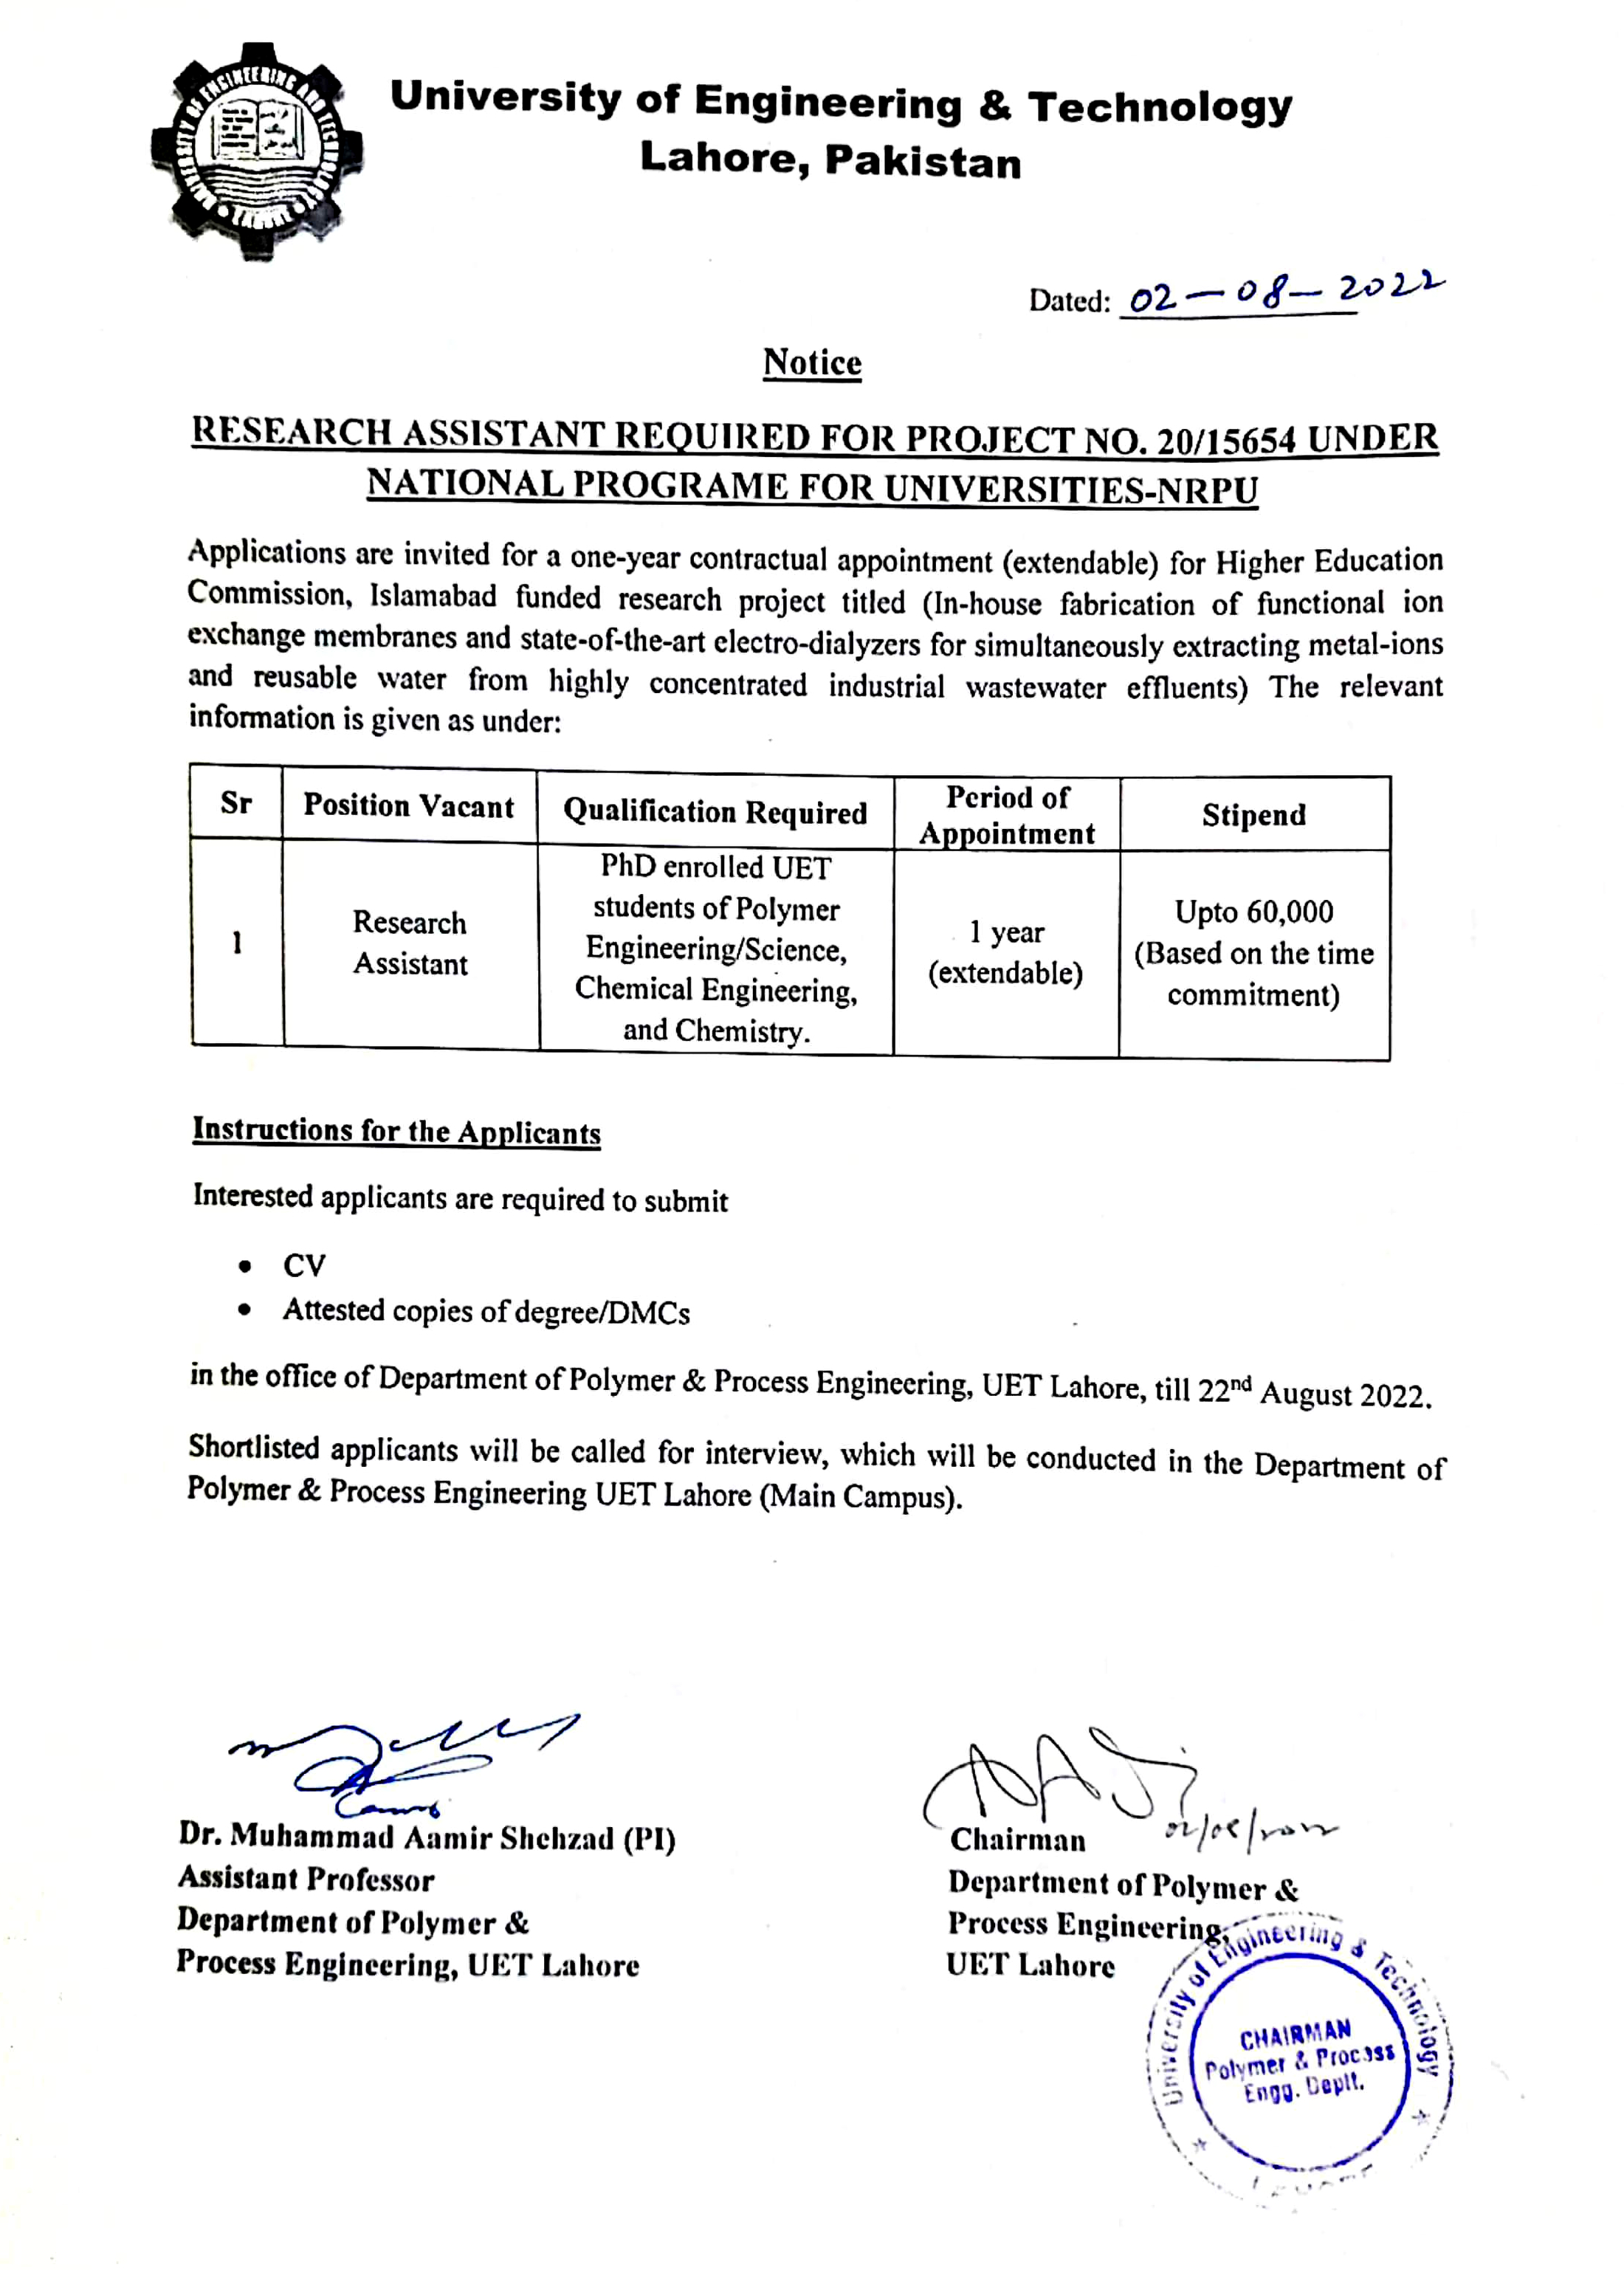 Research_Assistant_is_Required_in_Polymer_x_Process_Engg._Dept.